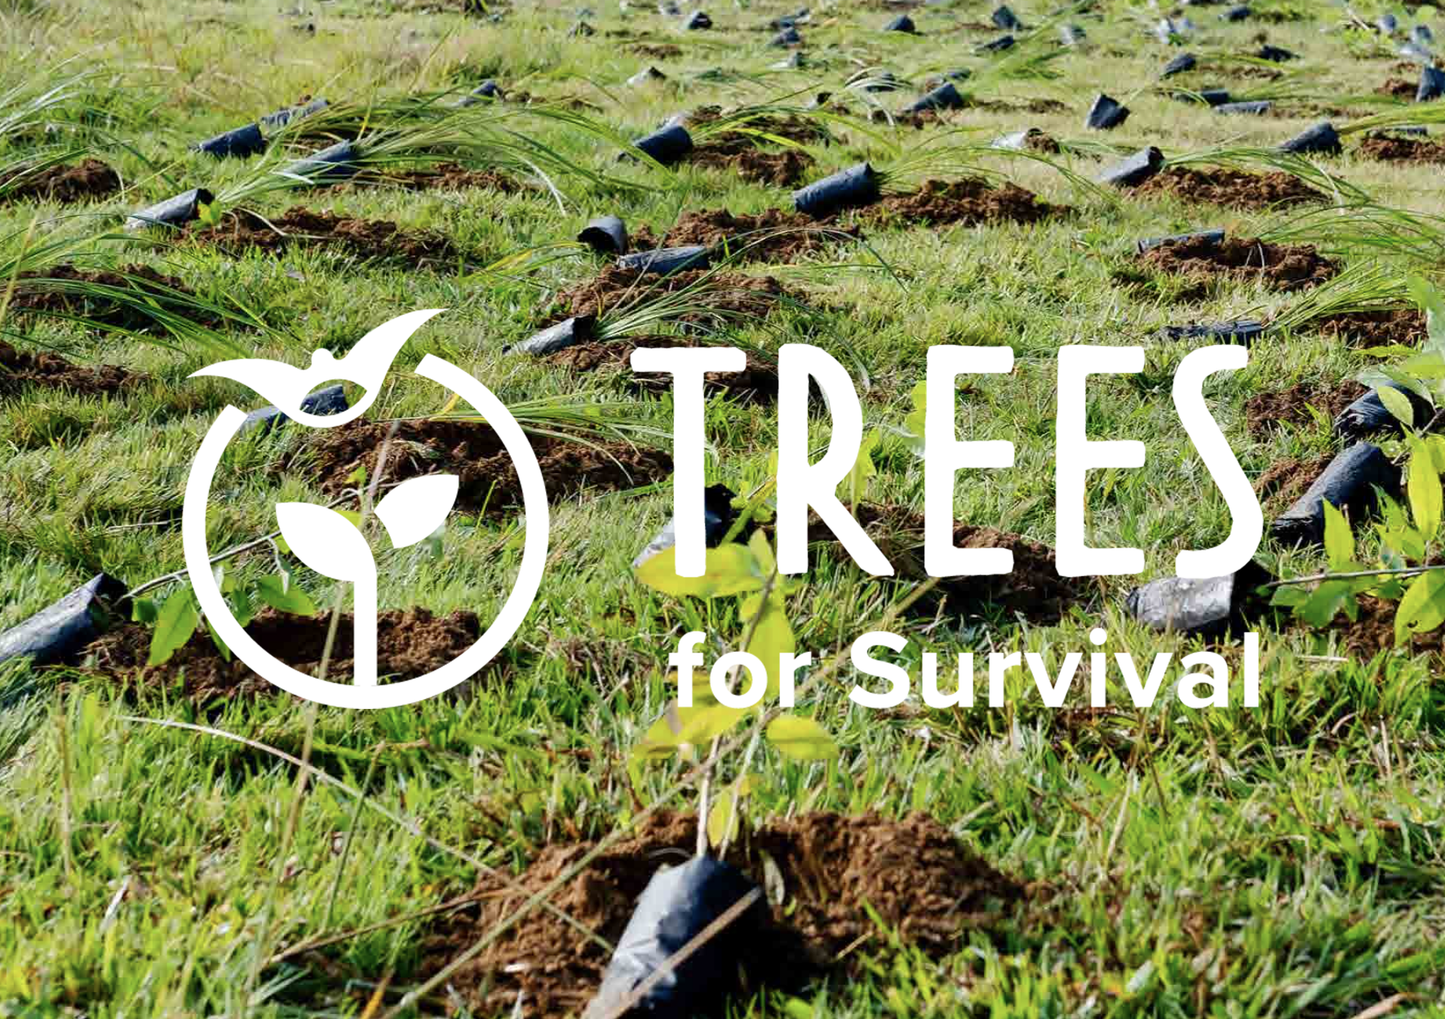 Would you like to donate to Trees for Survival?